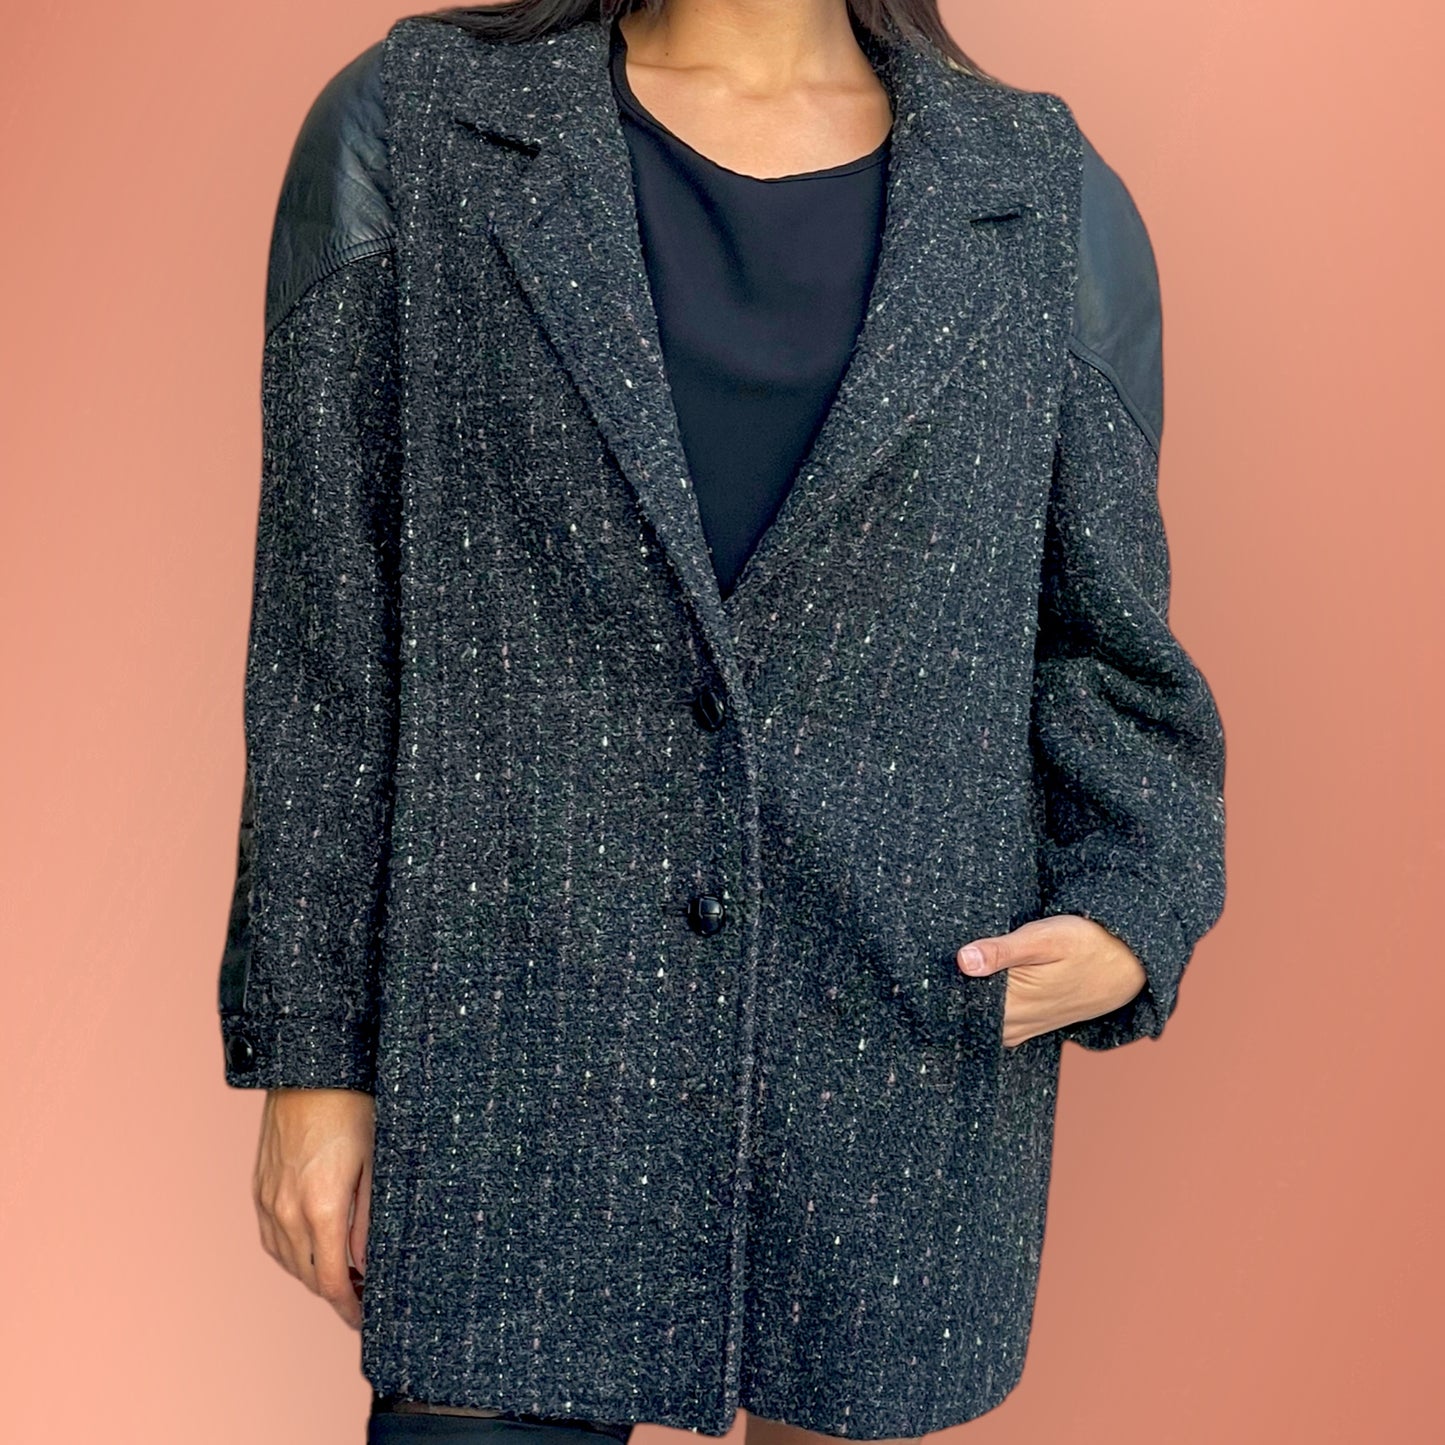 Fashionable Vintage Pink & White Pinstriped Grey Tweed Wool Blend Coat with Leather Shoulder